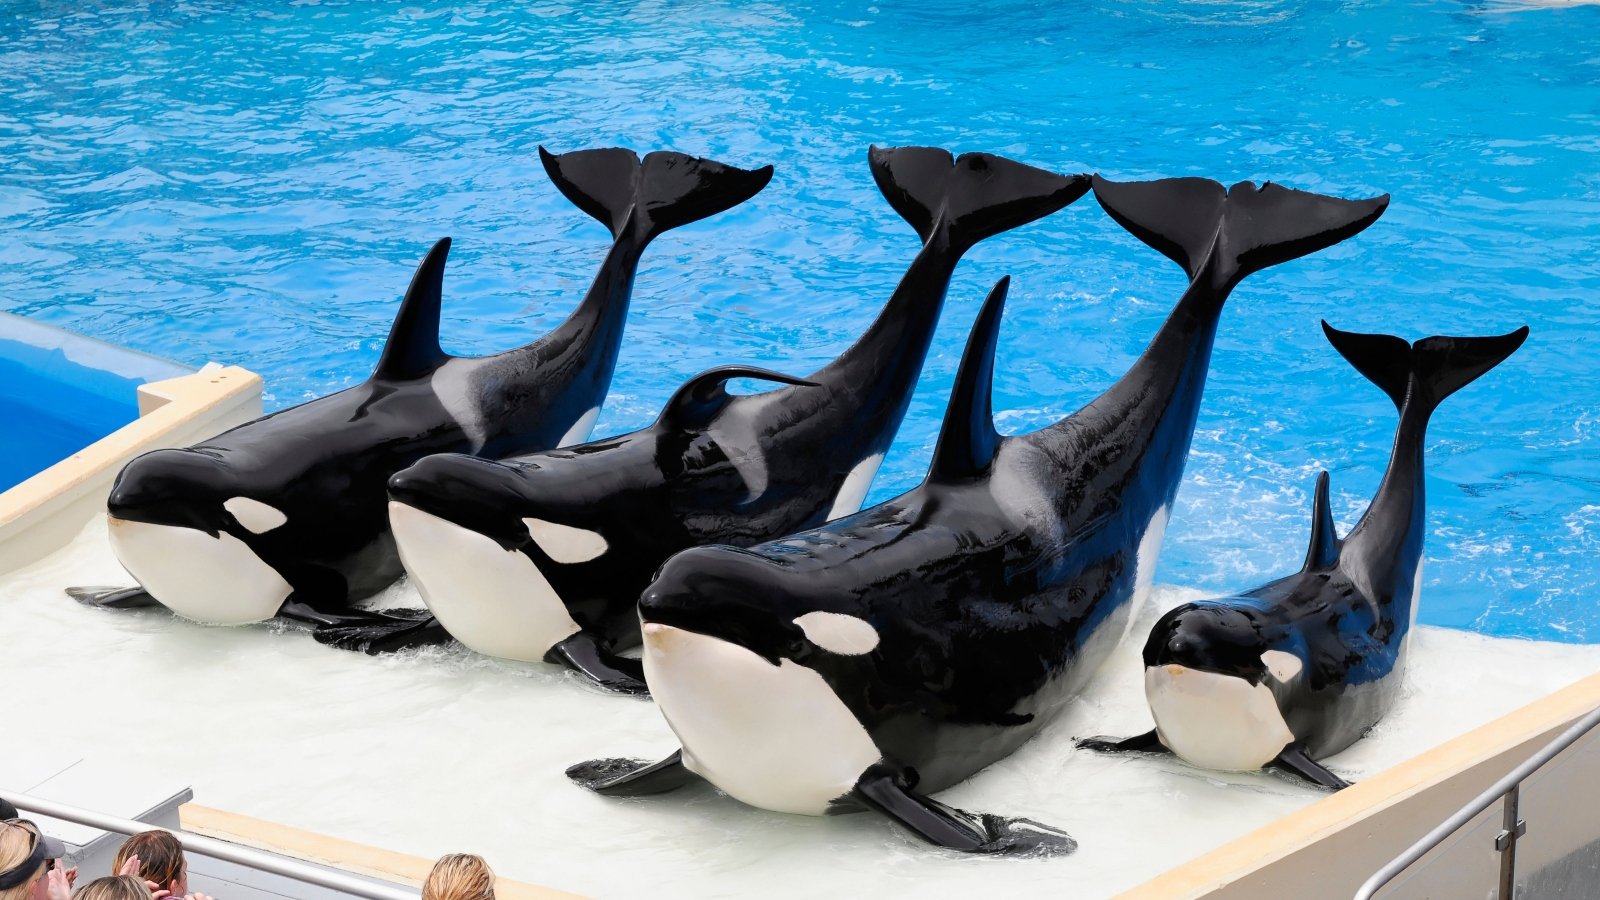 Orcas performing at animal marine park SeaWorld, which has been accused of animal cruelty